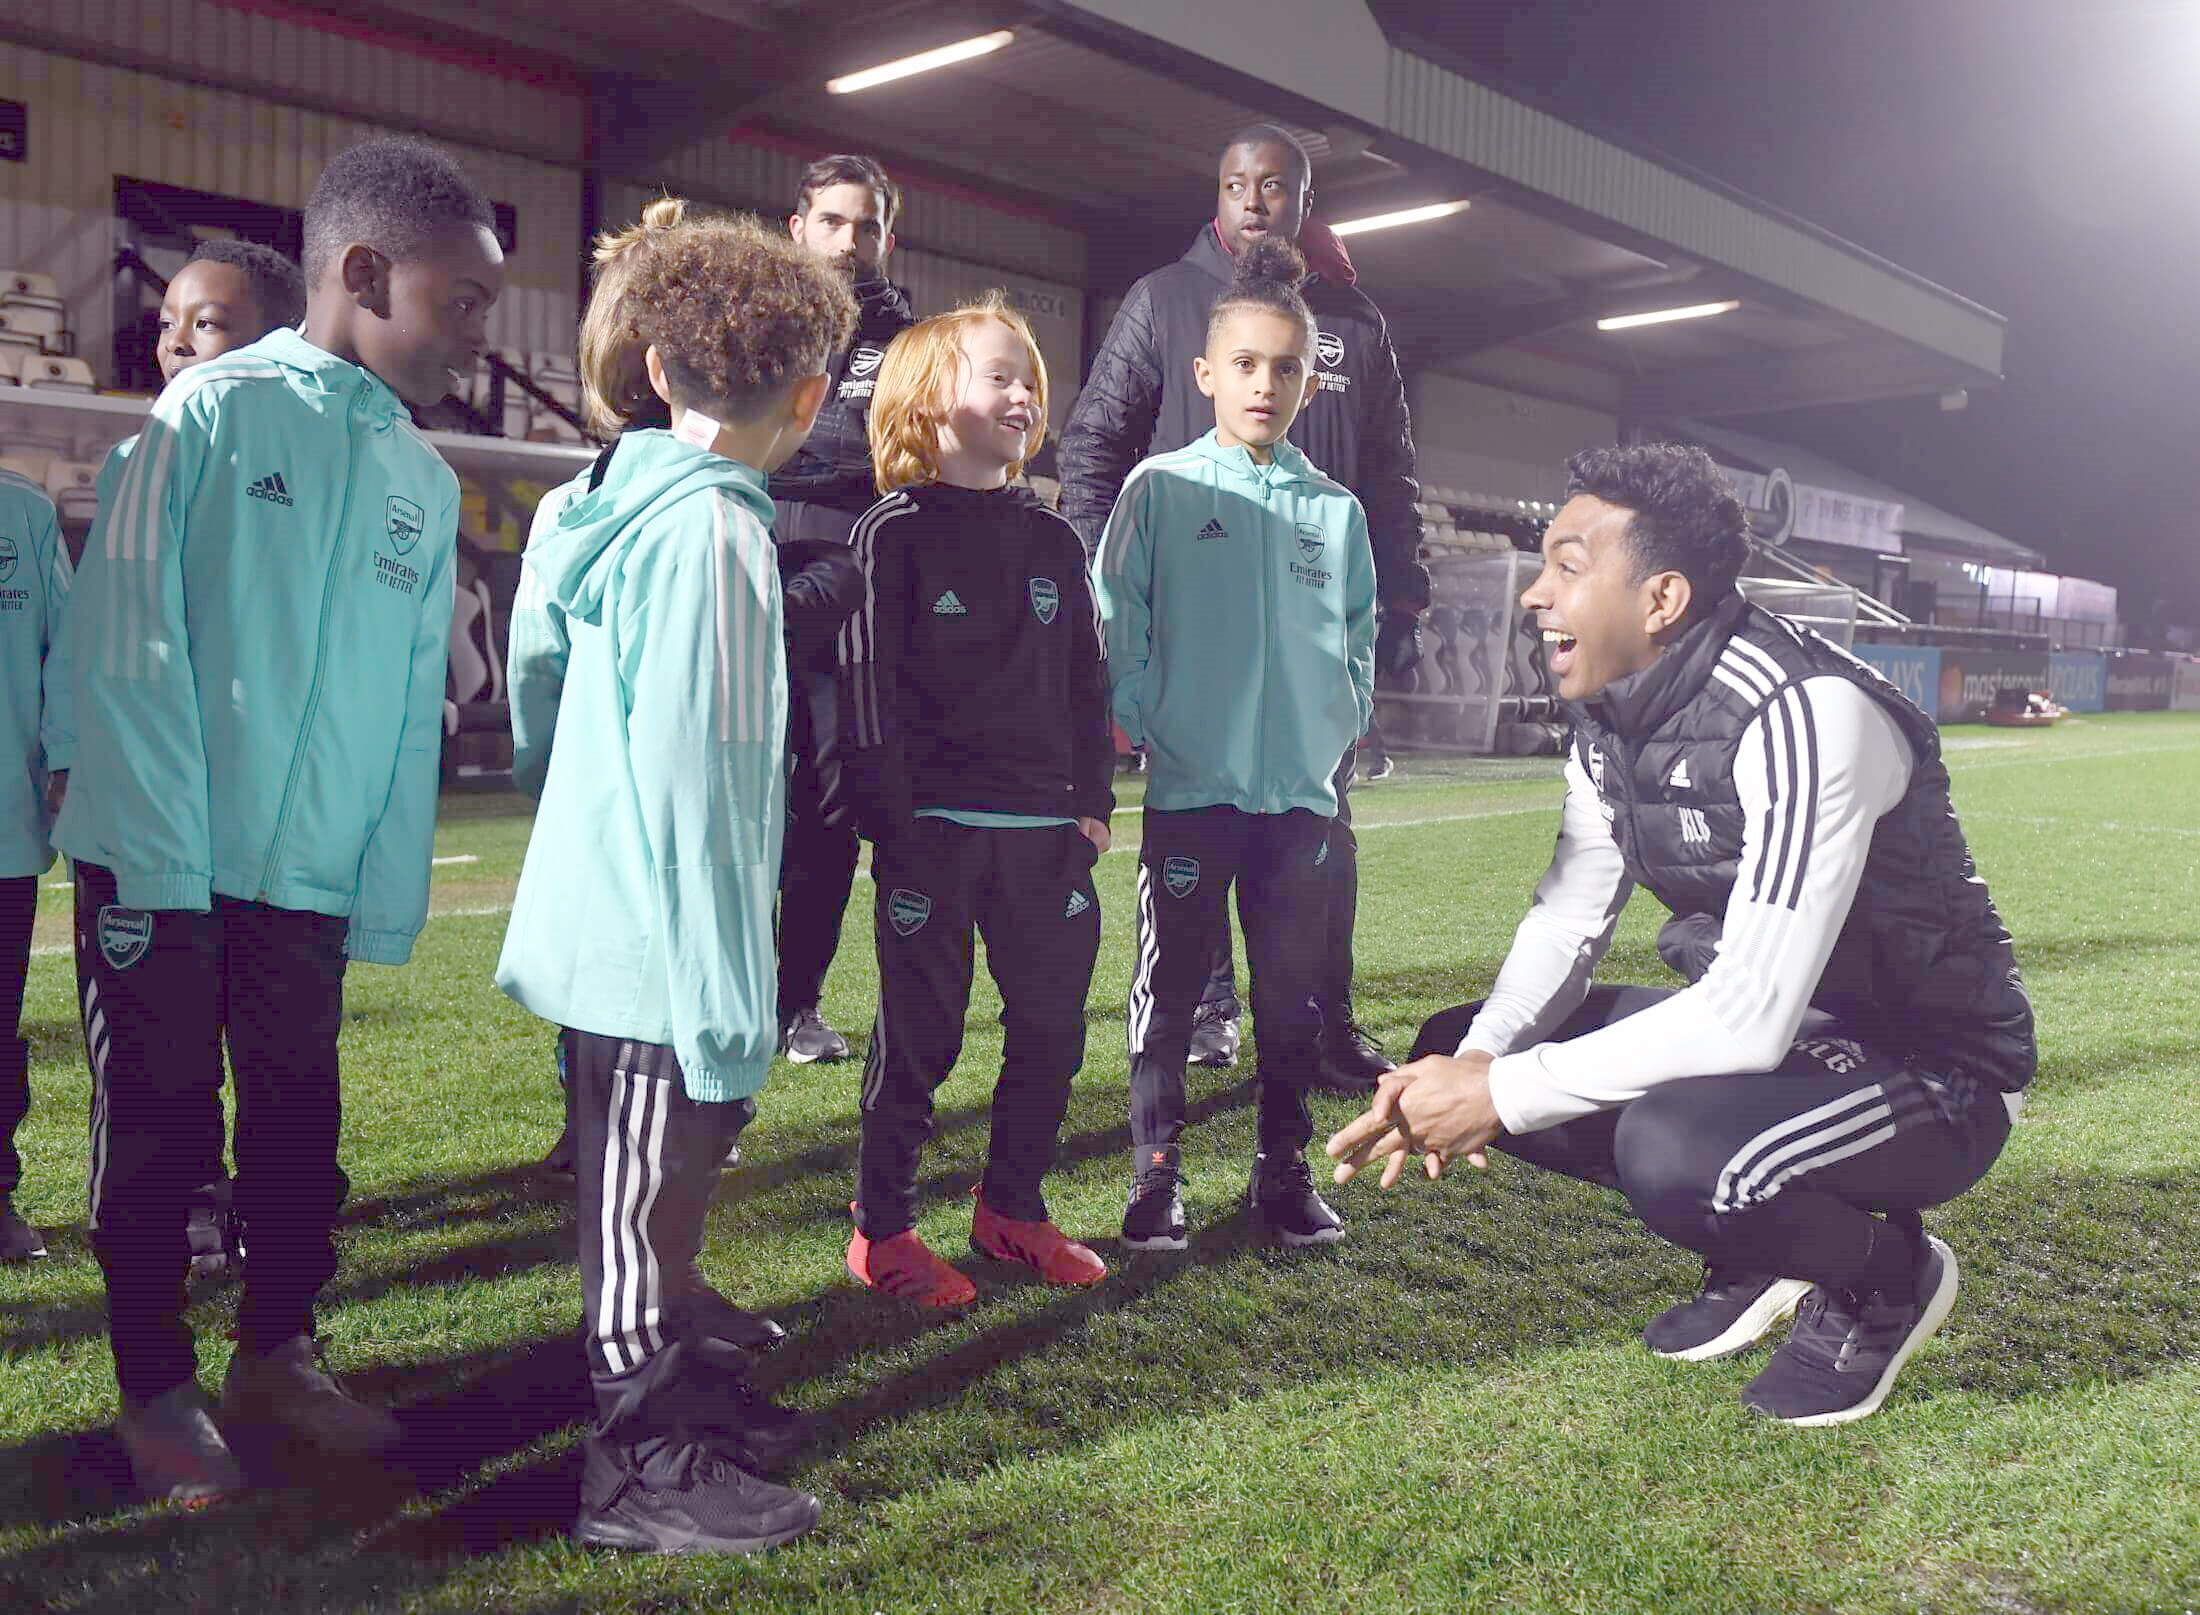 A coach squats down to talk to a group of young footballers inside a football stadium